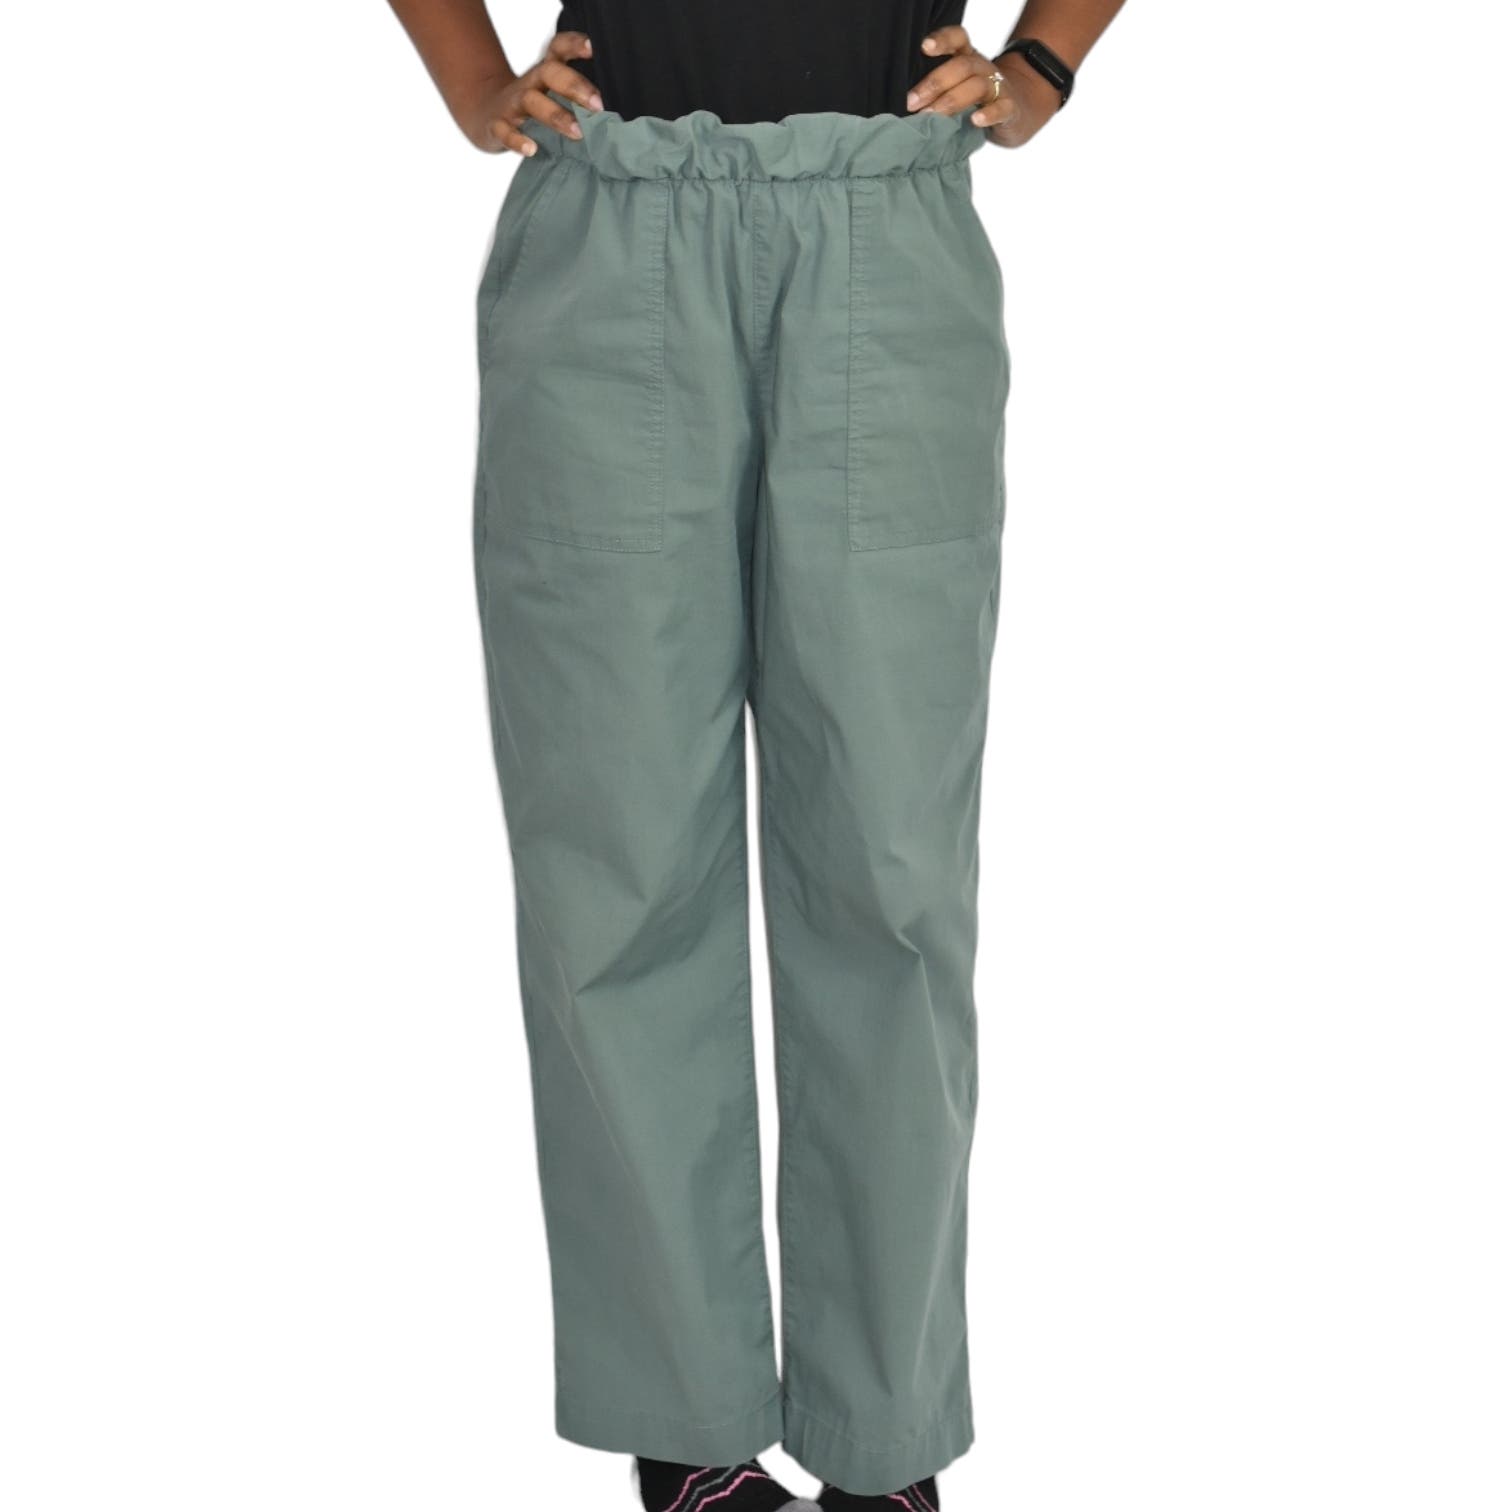 Gap Off Duty Khakis Green Olive Chino Pants Wide Leg Pull On High Waist Utility Size Small